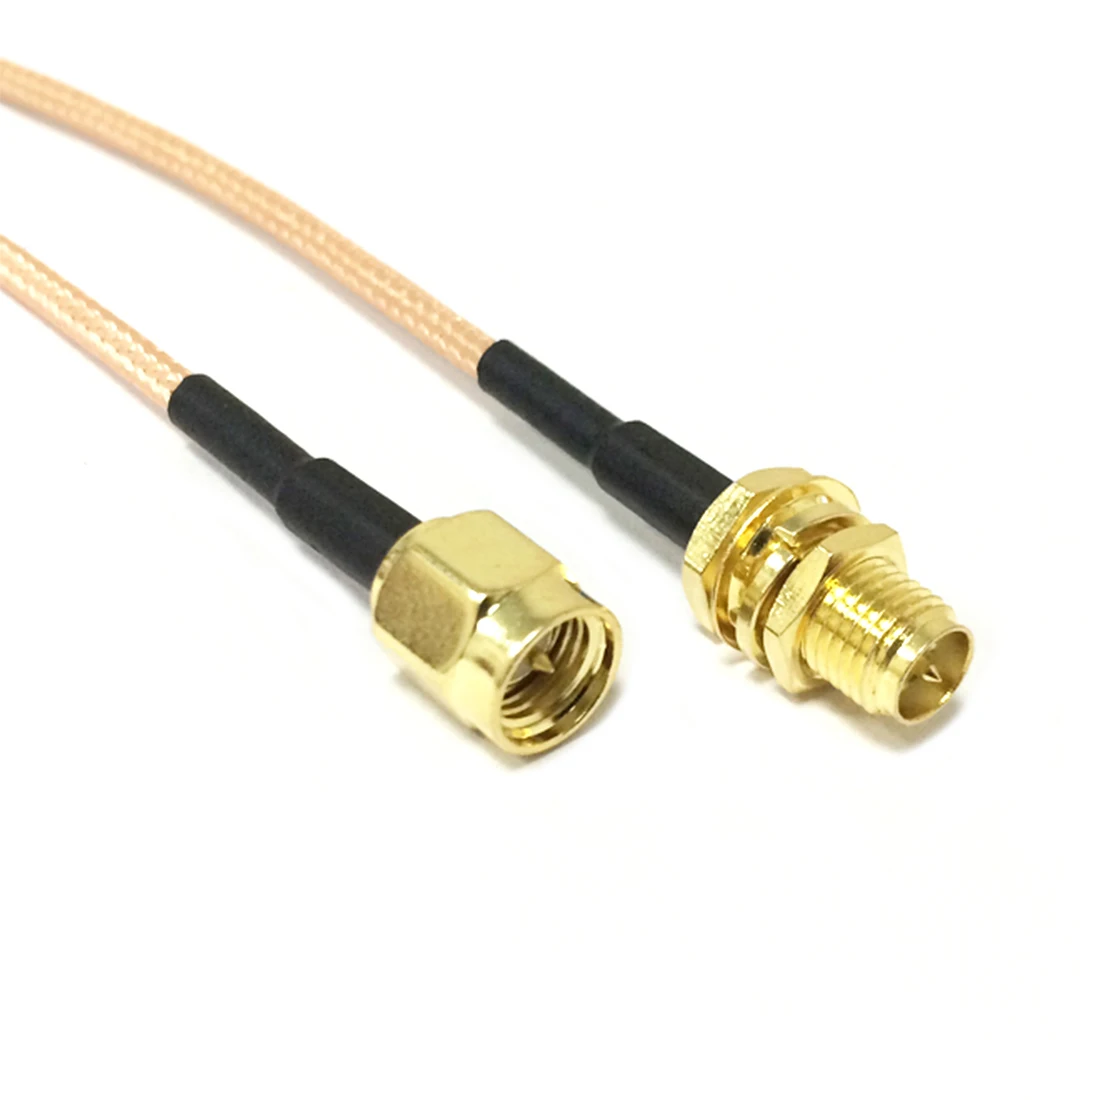 

New Modem Conversion Cable SMA Male Plug To RP-SMA Female Jack Connector RG316 Pigtail 15CM 6inch Adapter for Wifi Antenna